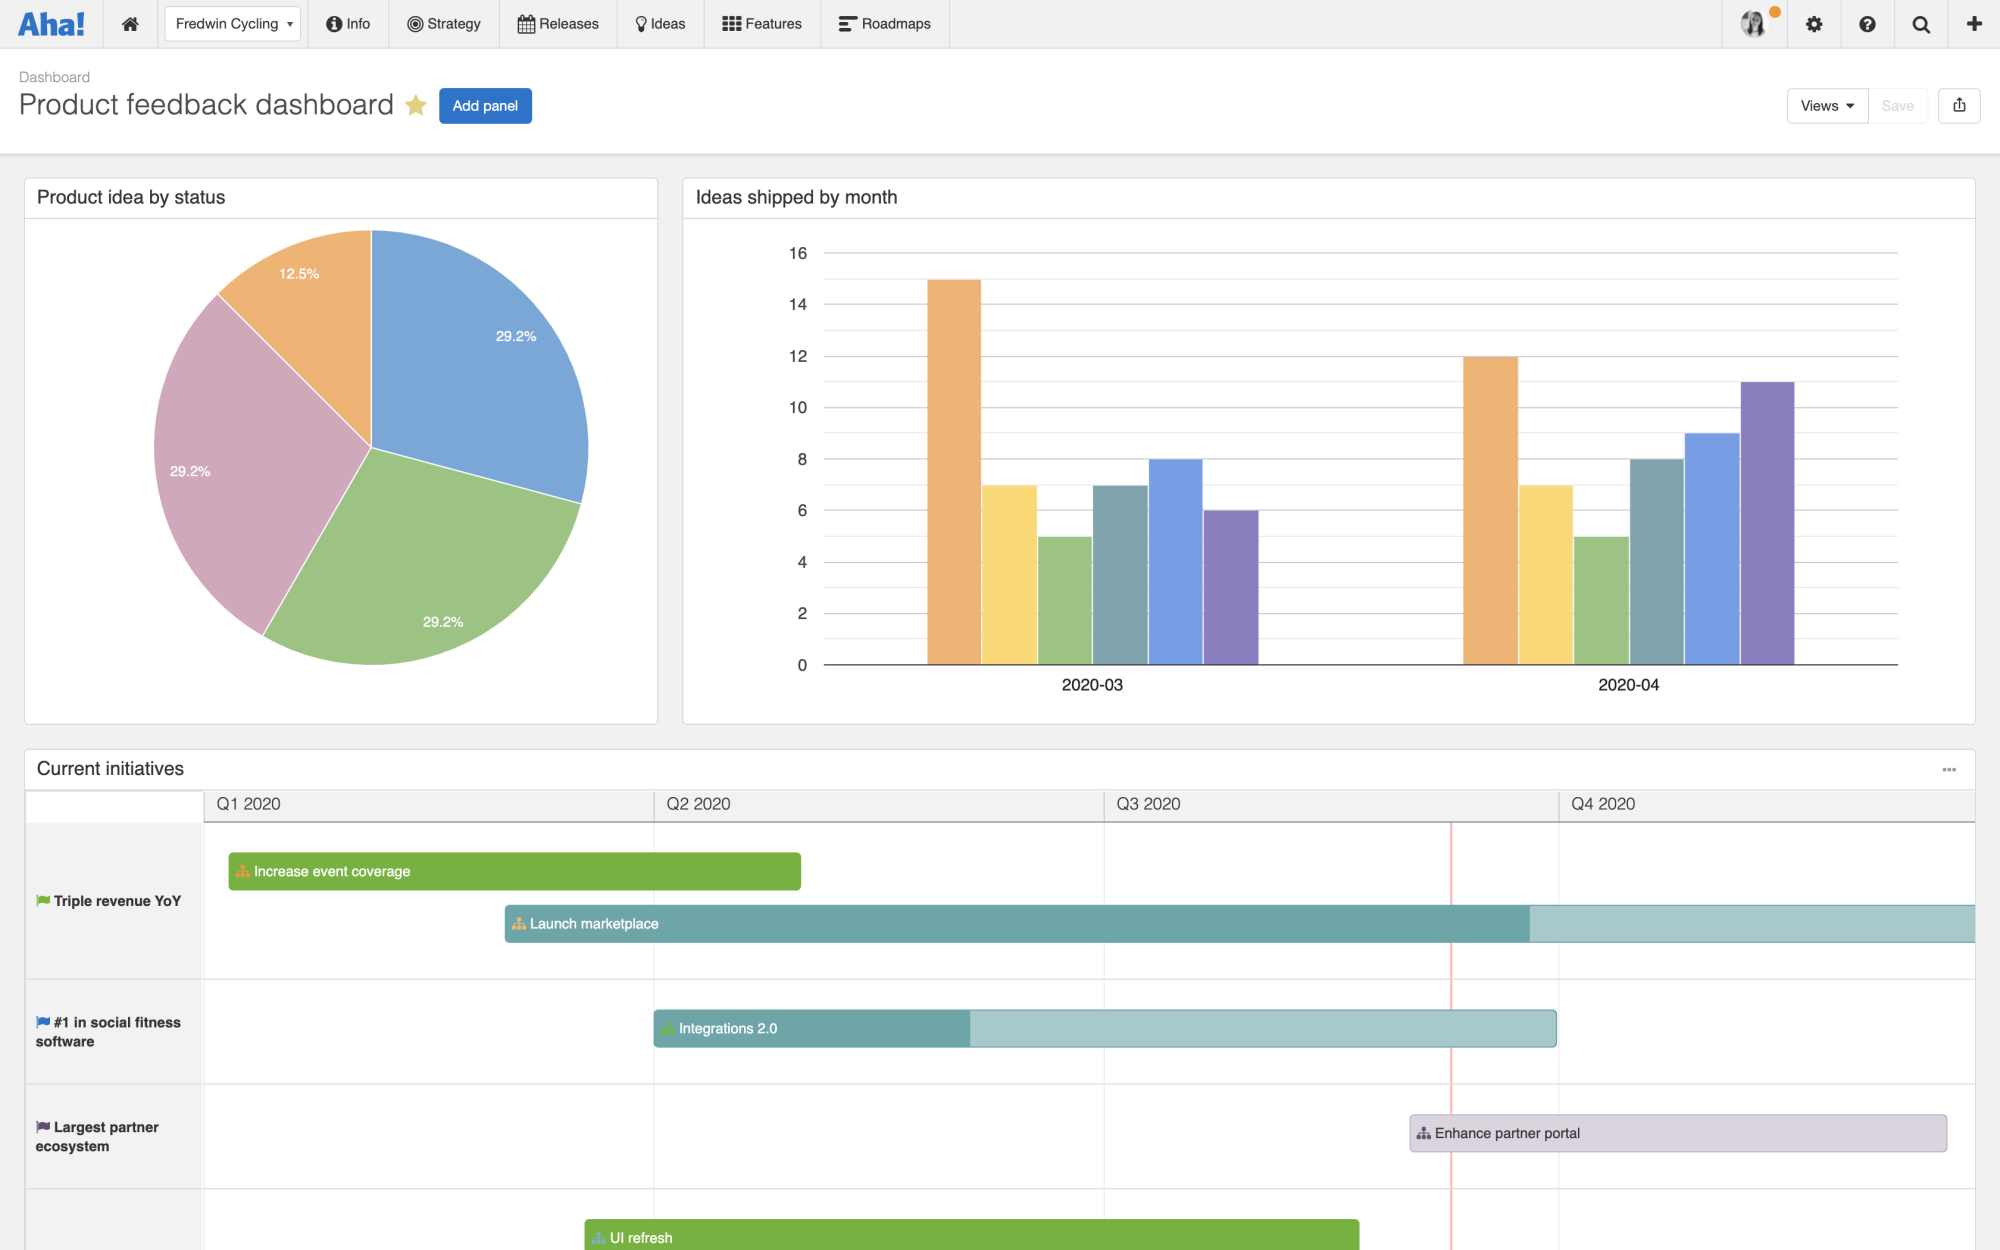 A dashboard with a pie chart, bar chart, and roadmap